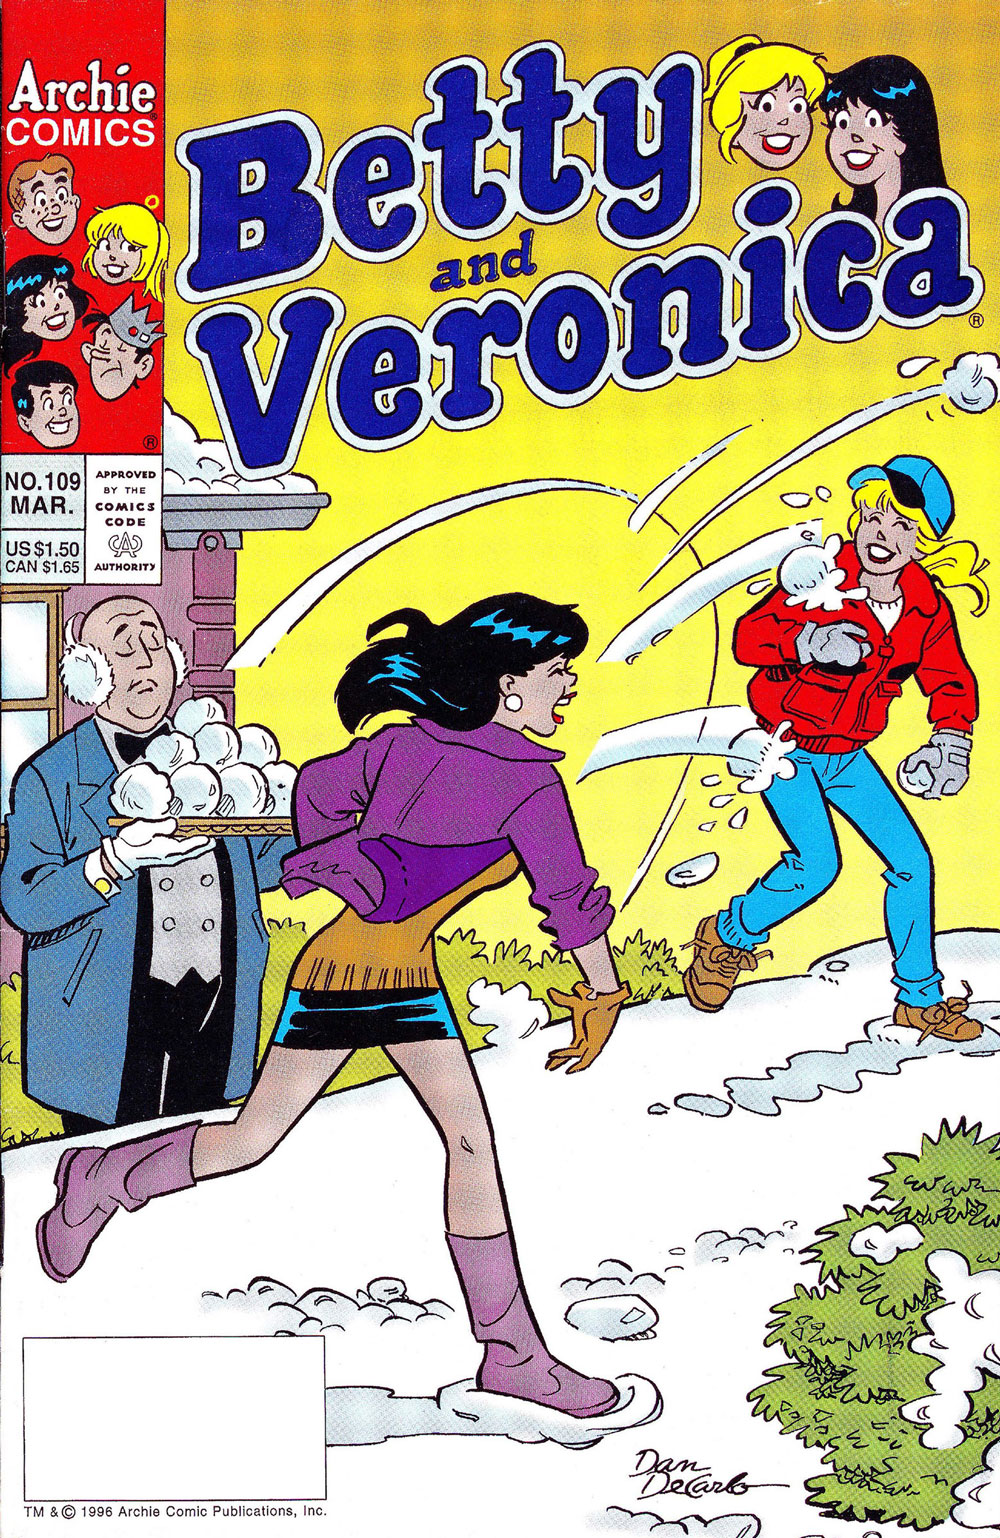 The cover of BETTY AND VERONICA #109. Betty and Veronica have a snowball fight.